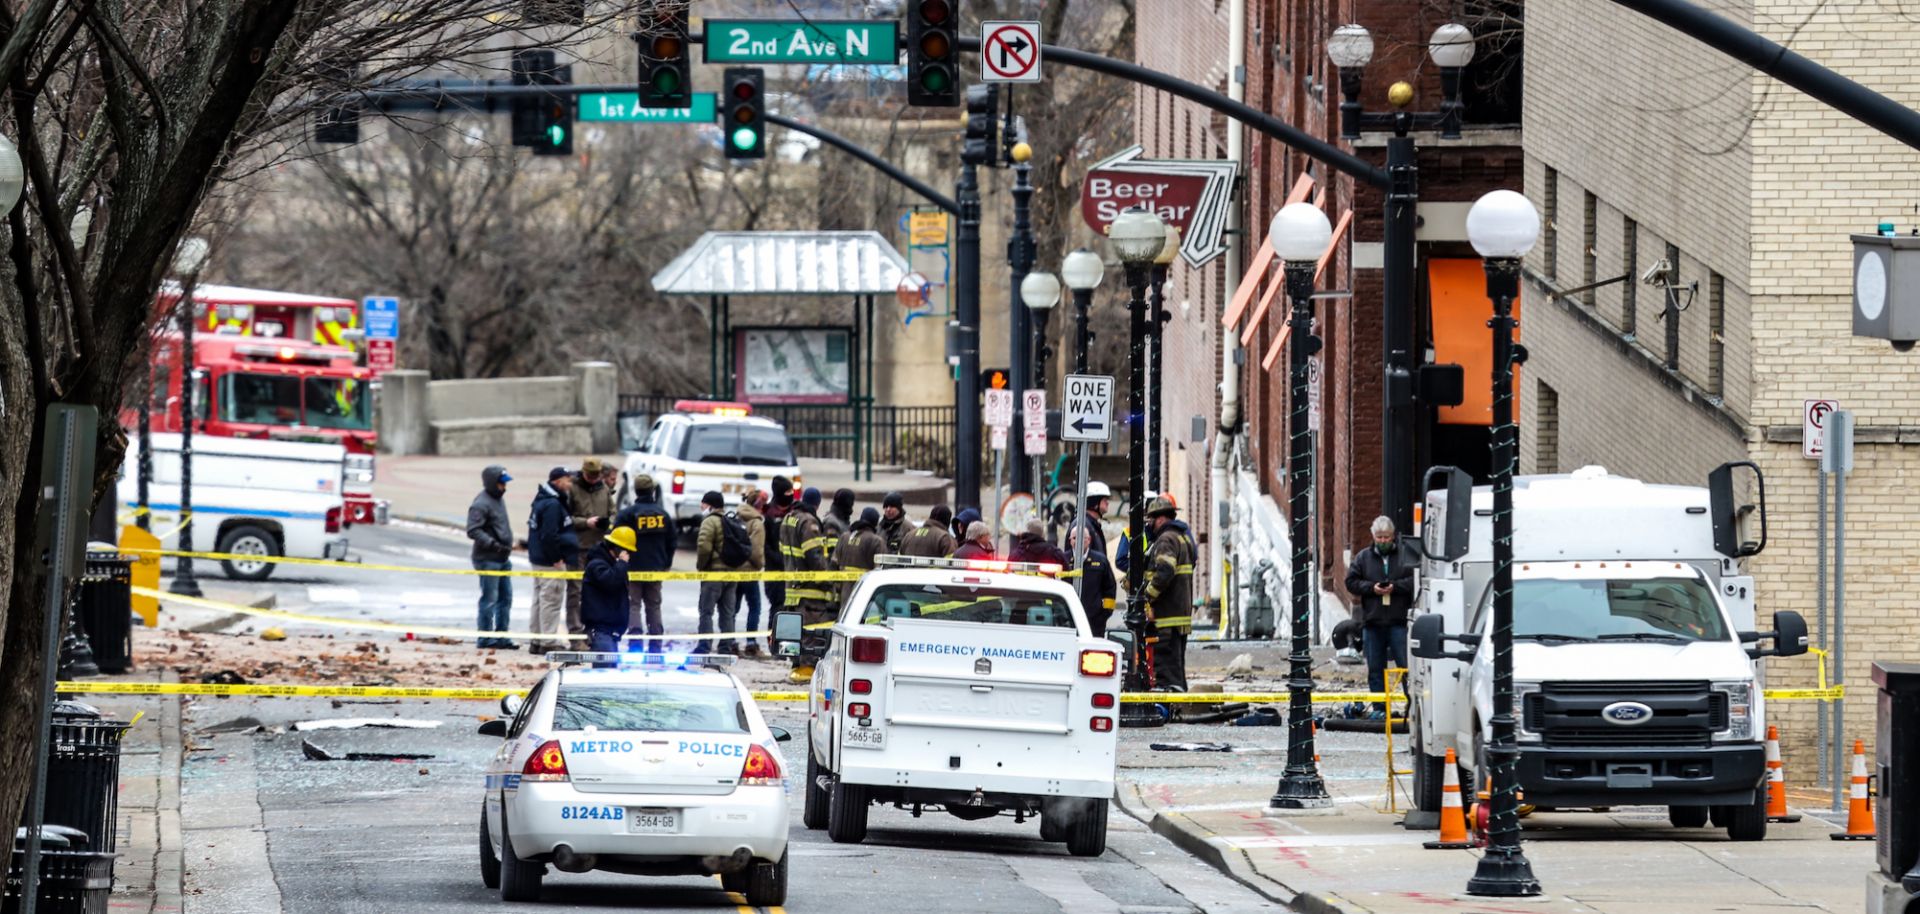 FBI and first responders work on the scene after an explosion in Nashville, Tennessee, on Dec. 25, 2020. According to initial reports, a vehicle exploded downtown in the early morning hours of Christmas Day. 